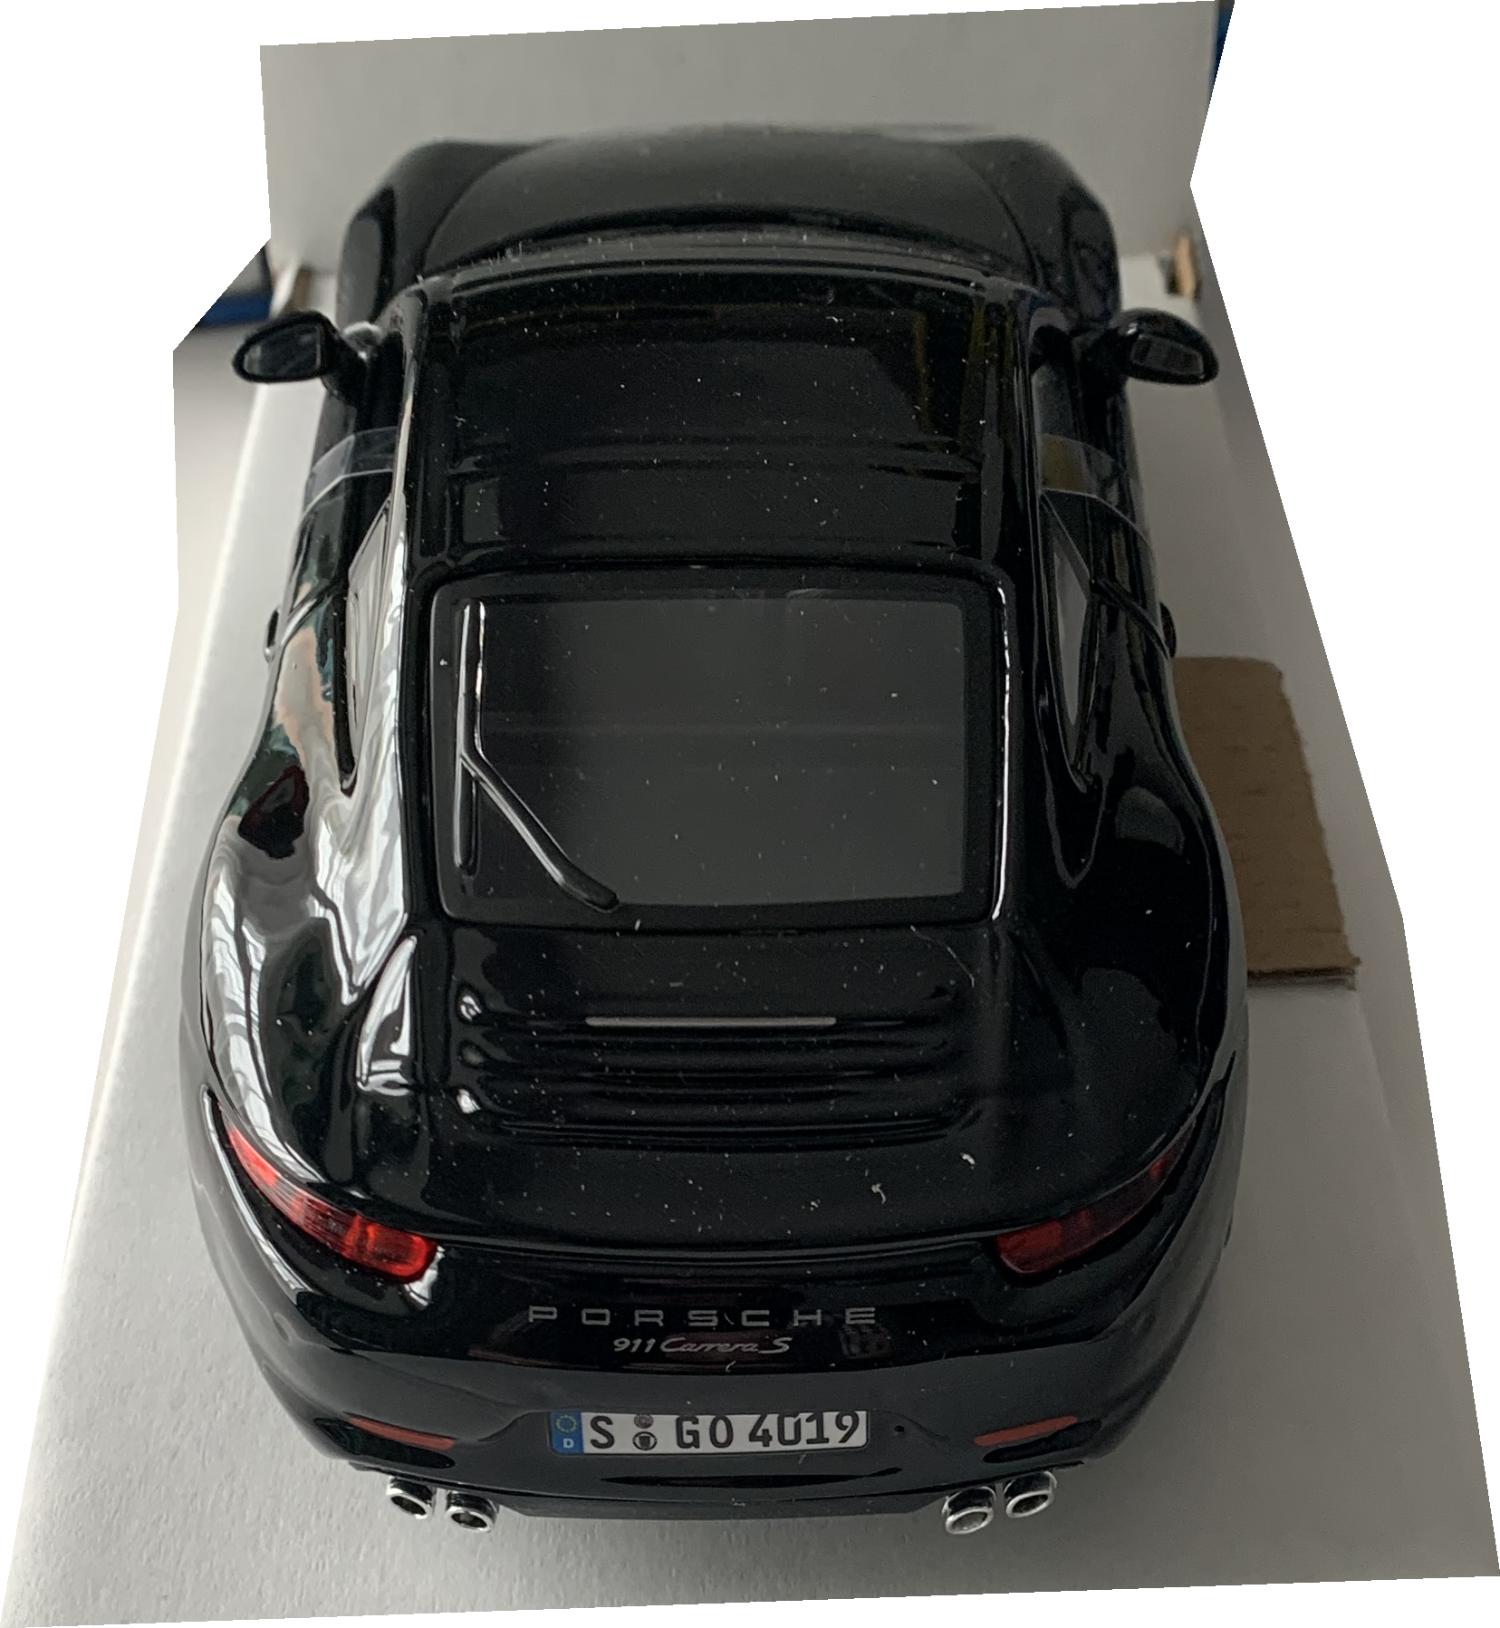 The model is presented in a window display box, the car is approx. 18.5 cm long and the presentation box is 24 cm long